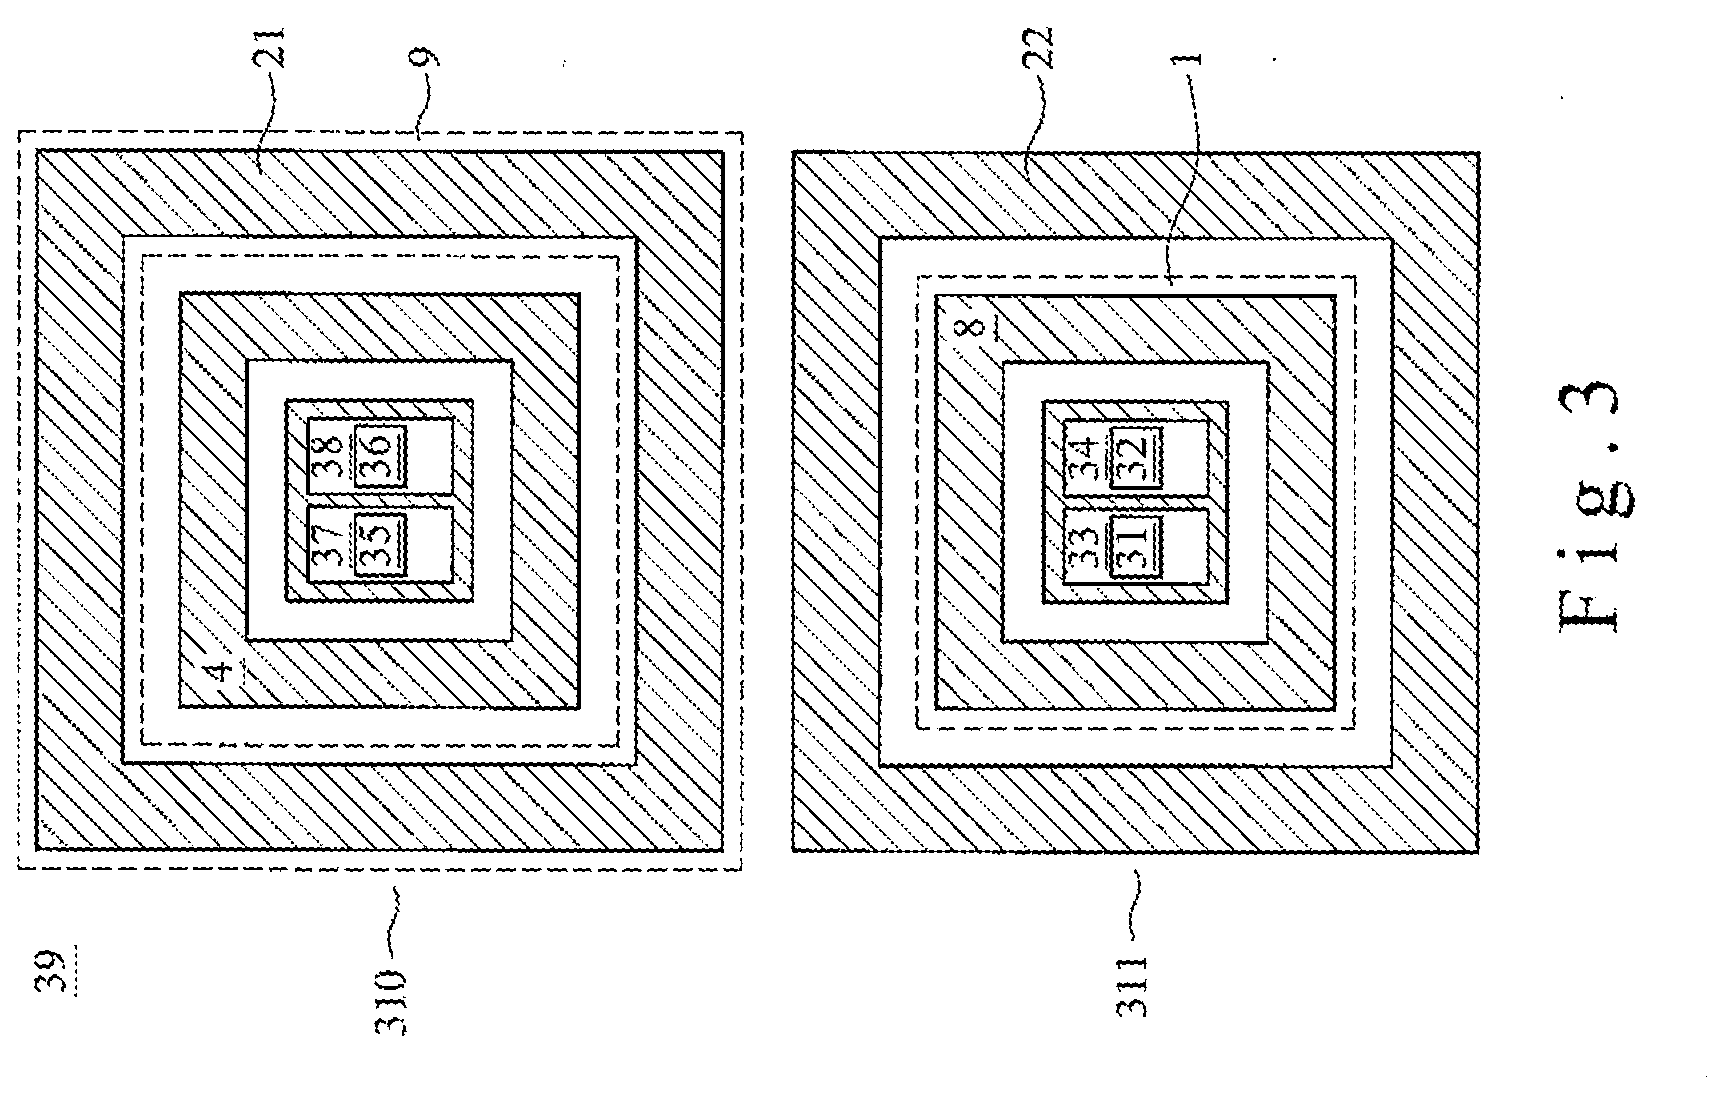 ESD protection apparatus and circuit thereof